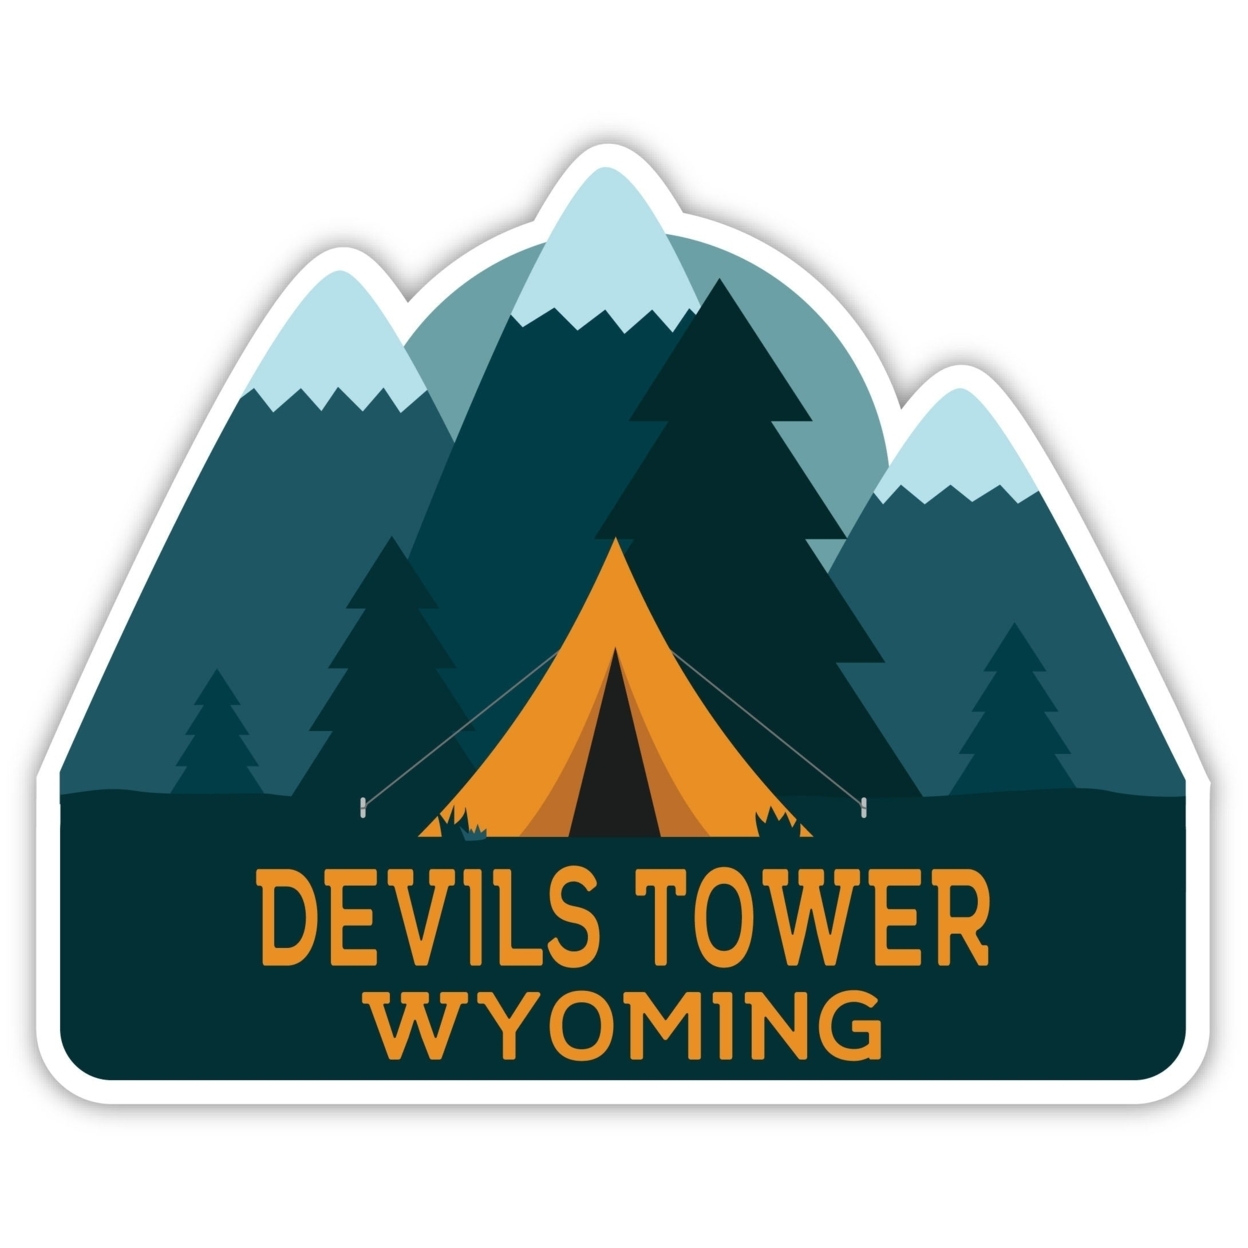 Devils Tower Wyoming Souvenir Decorative Stickers (Choose Theme And Size) - Single Unit, 12-Inch, Great Outdoors